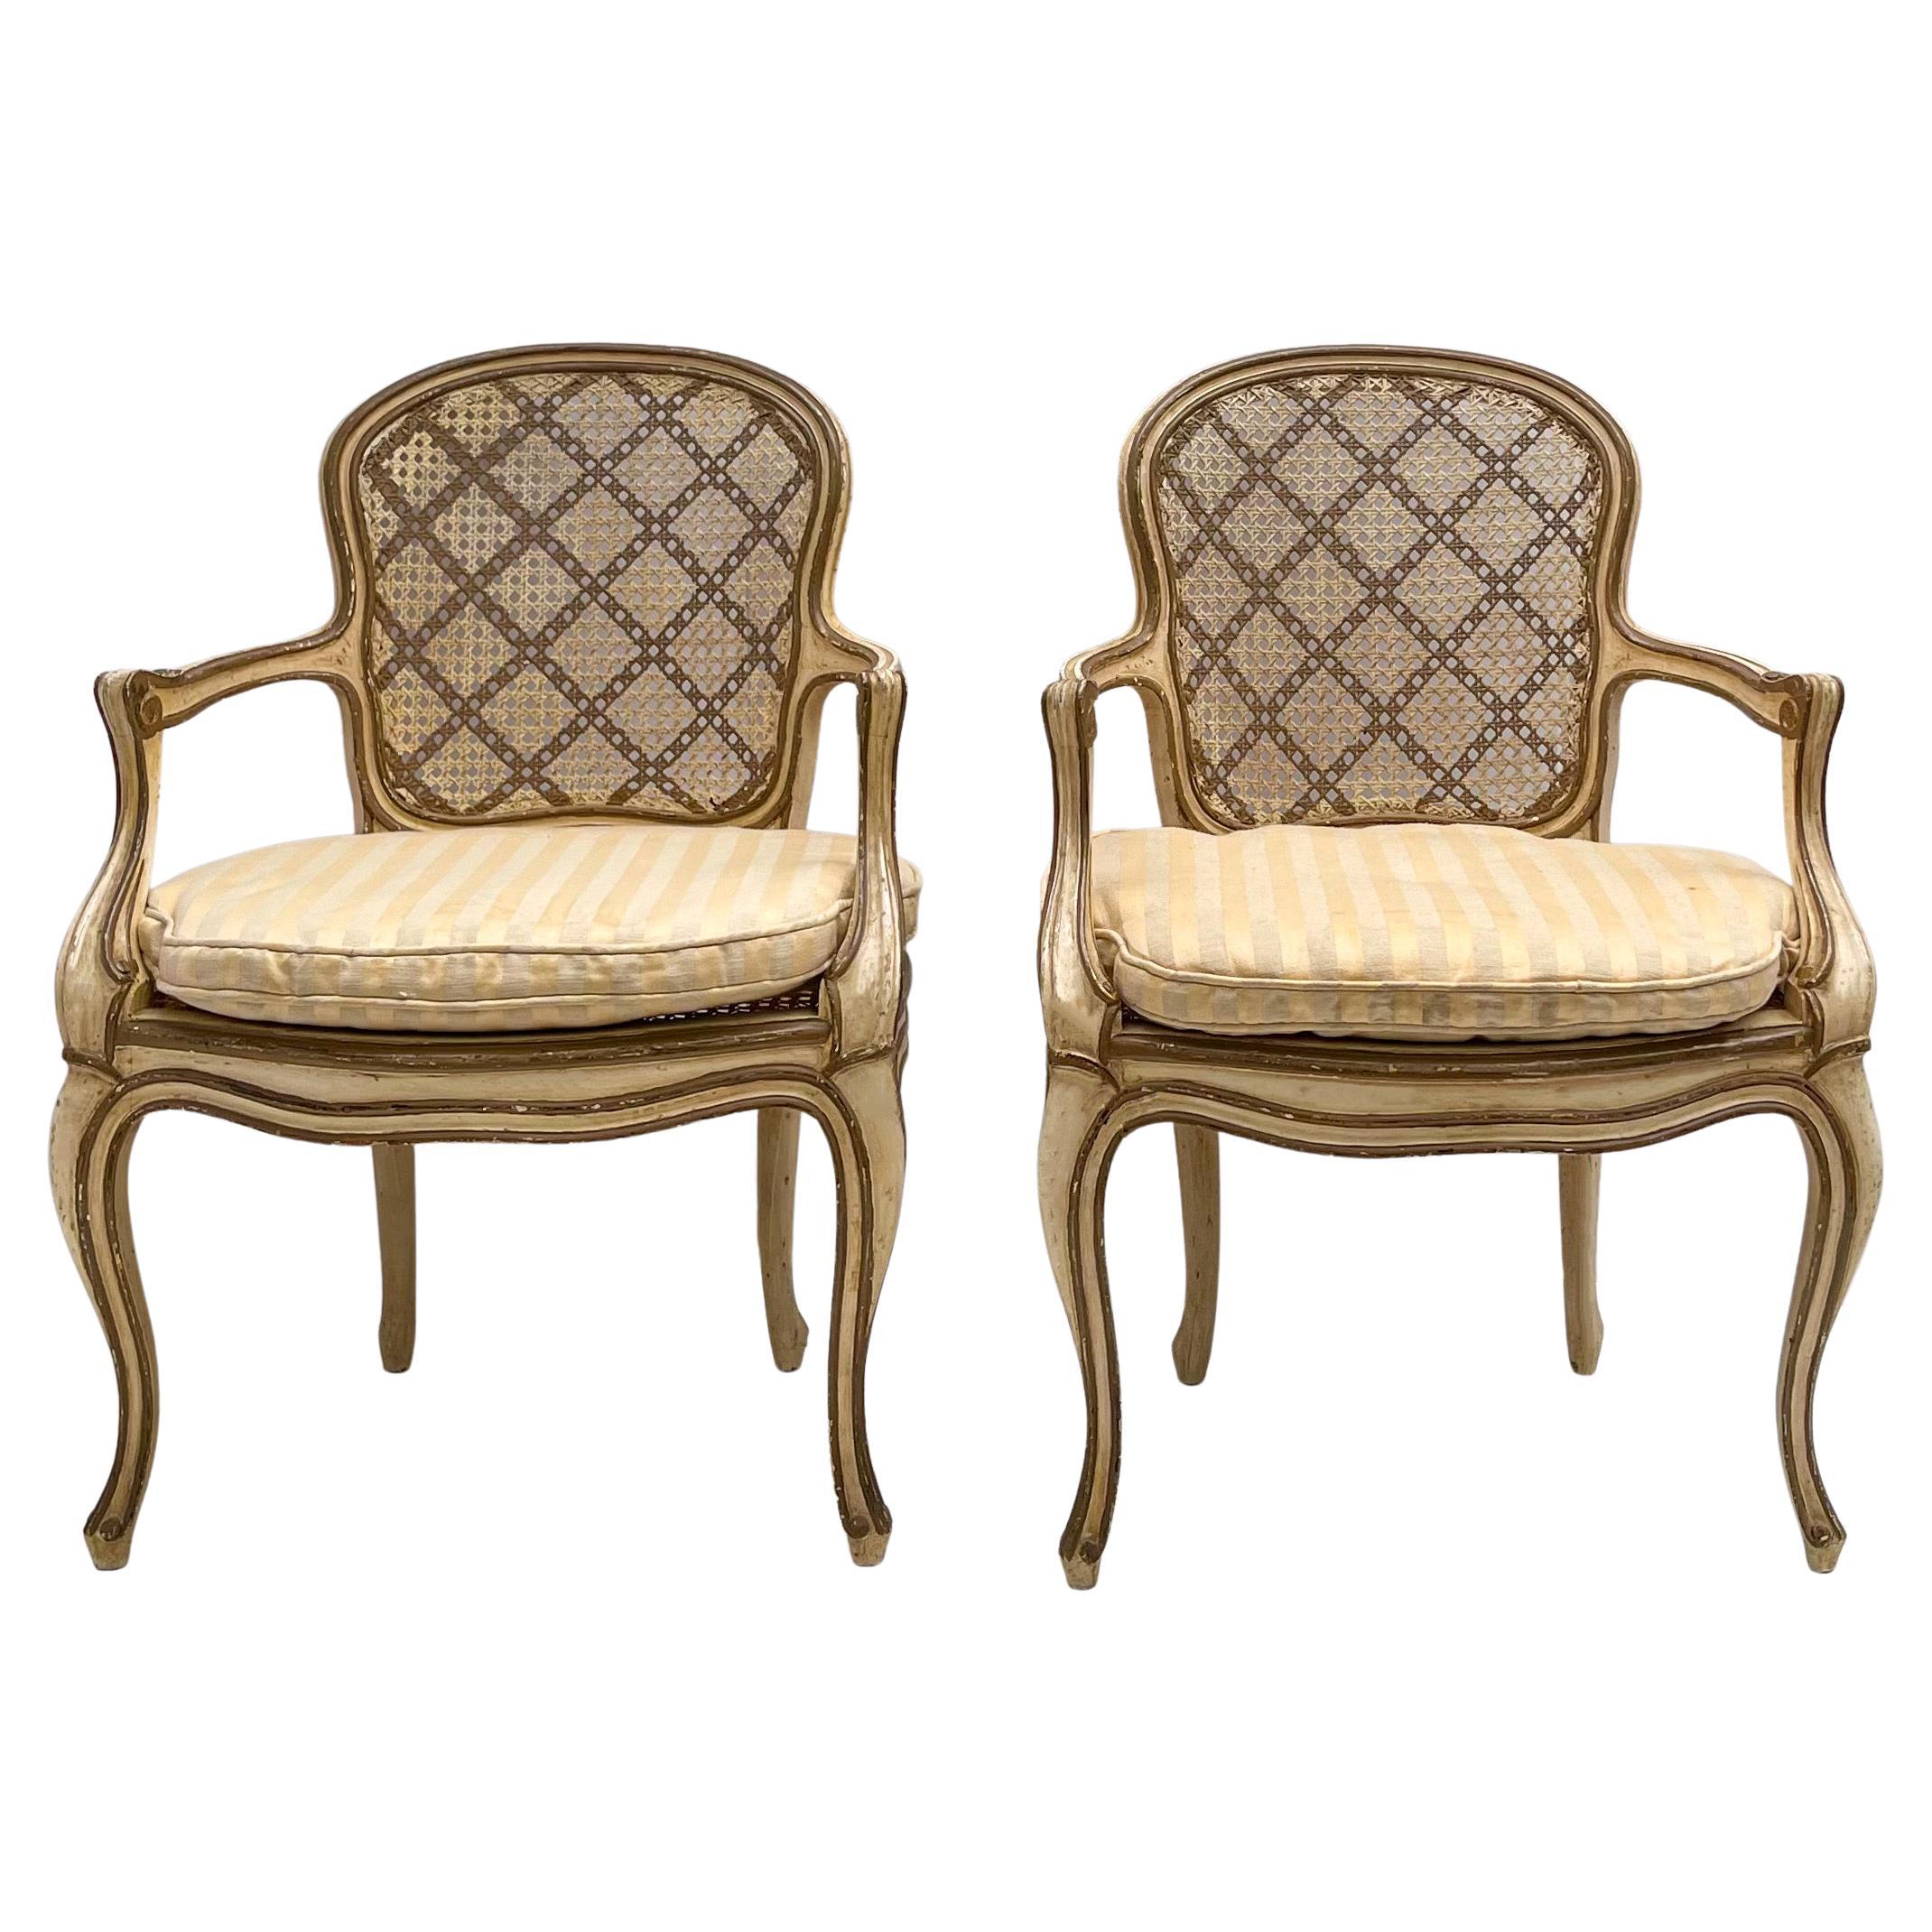 1950s Gilt and Painted French Bergere Chairs, Pair For Sale